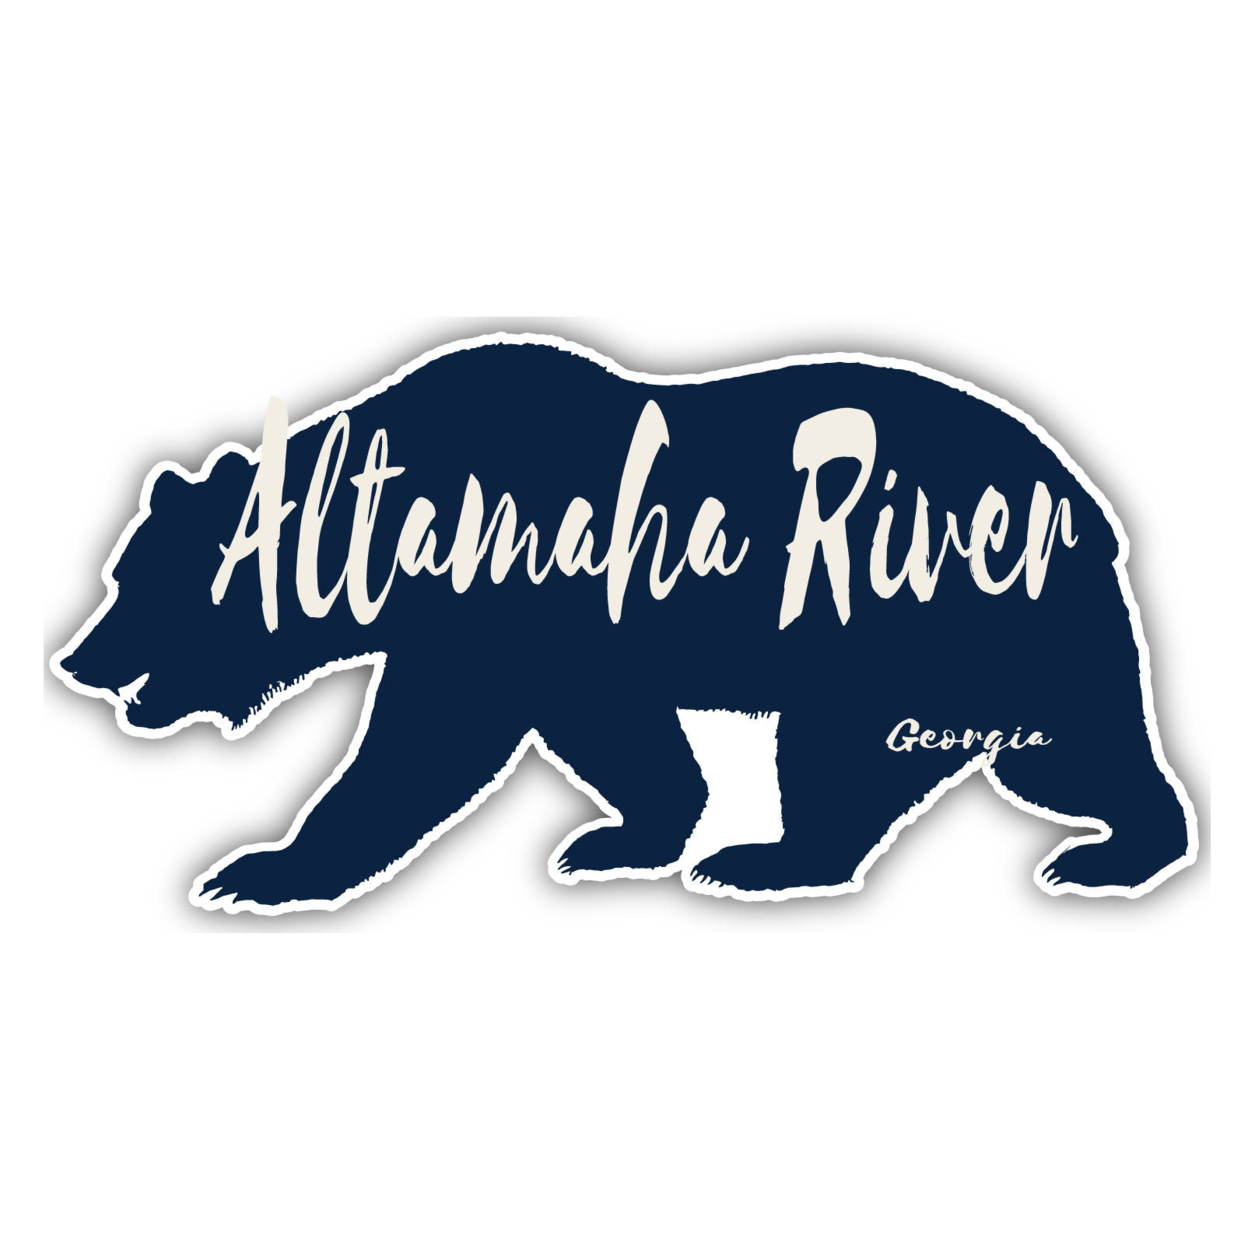 Altamaha River Georgia Souvenir Decorative Stickers (Choose Theme And Size) - 4-Pack, 4-Inch, Great Outdoors